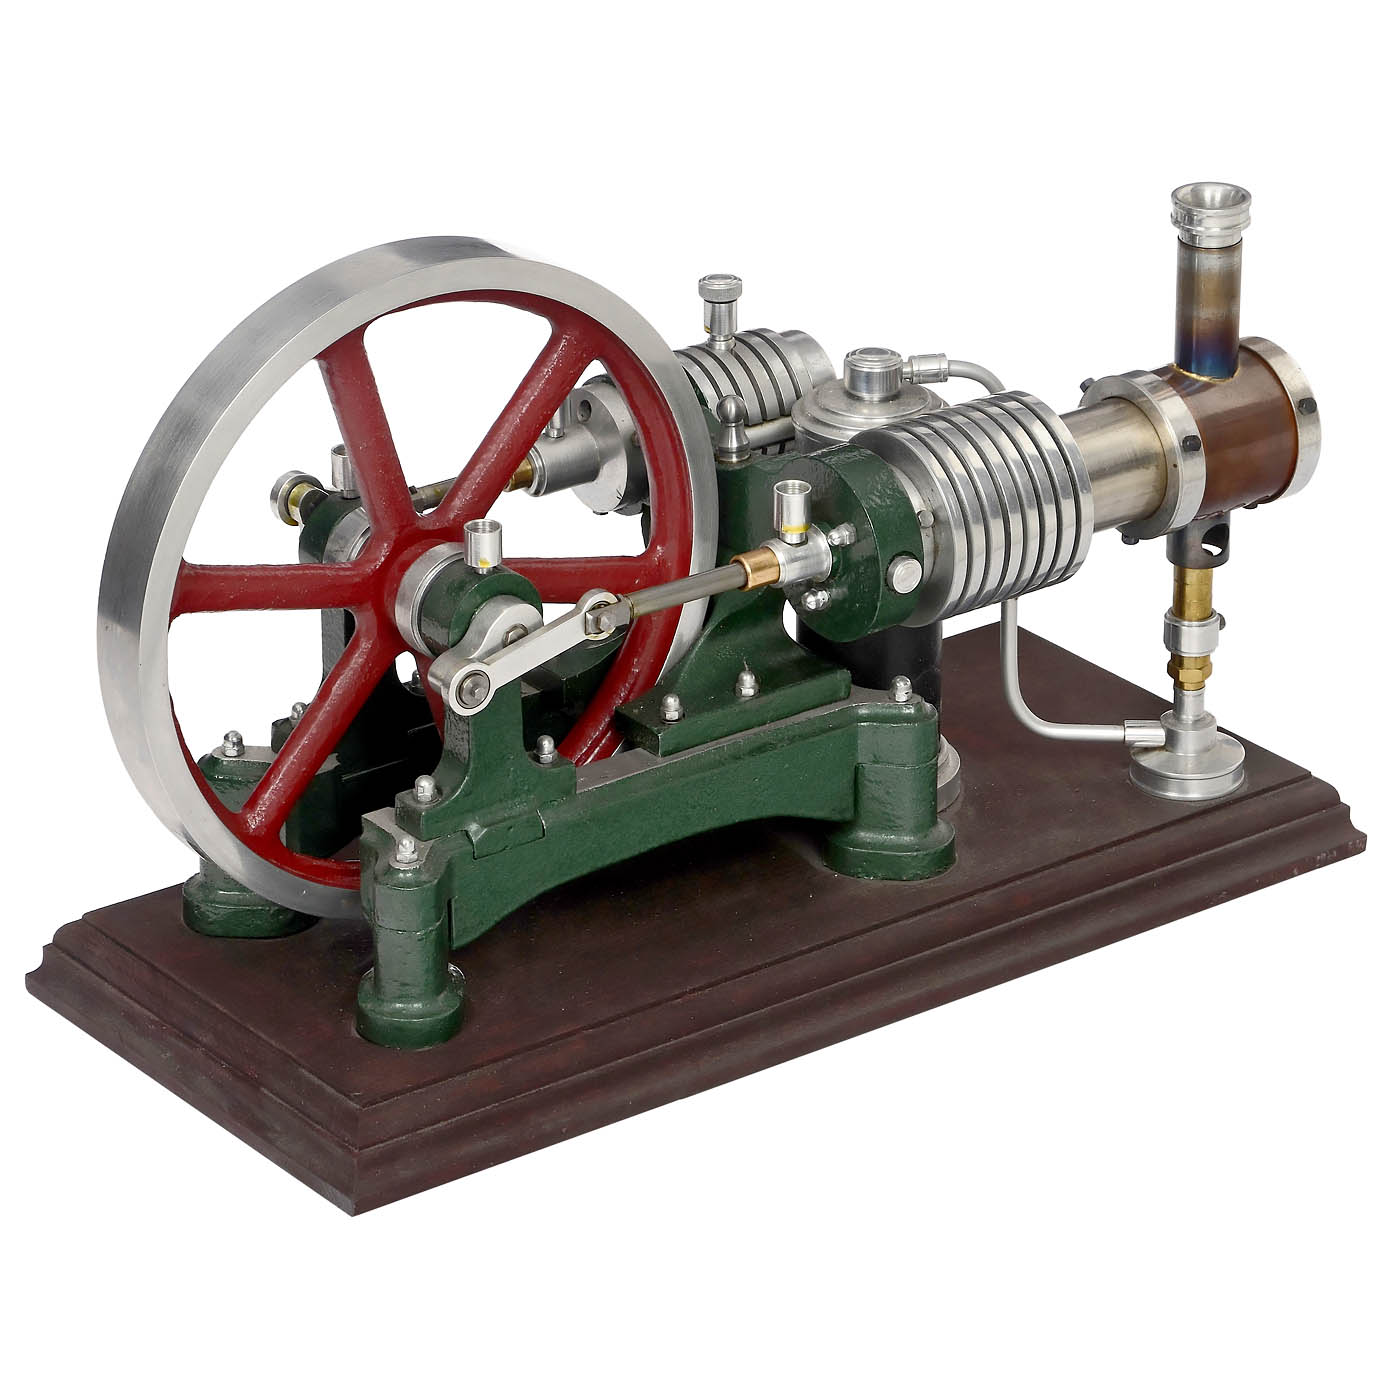 Twin-Cylinder Hot-Air Engine Working Model - Image 2 of 2